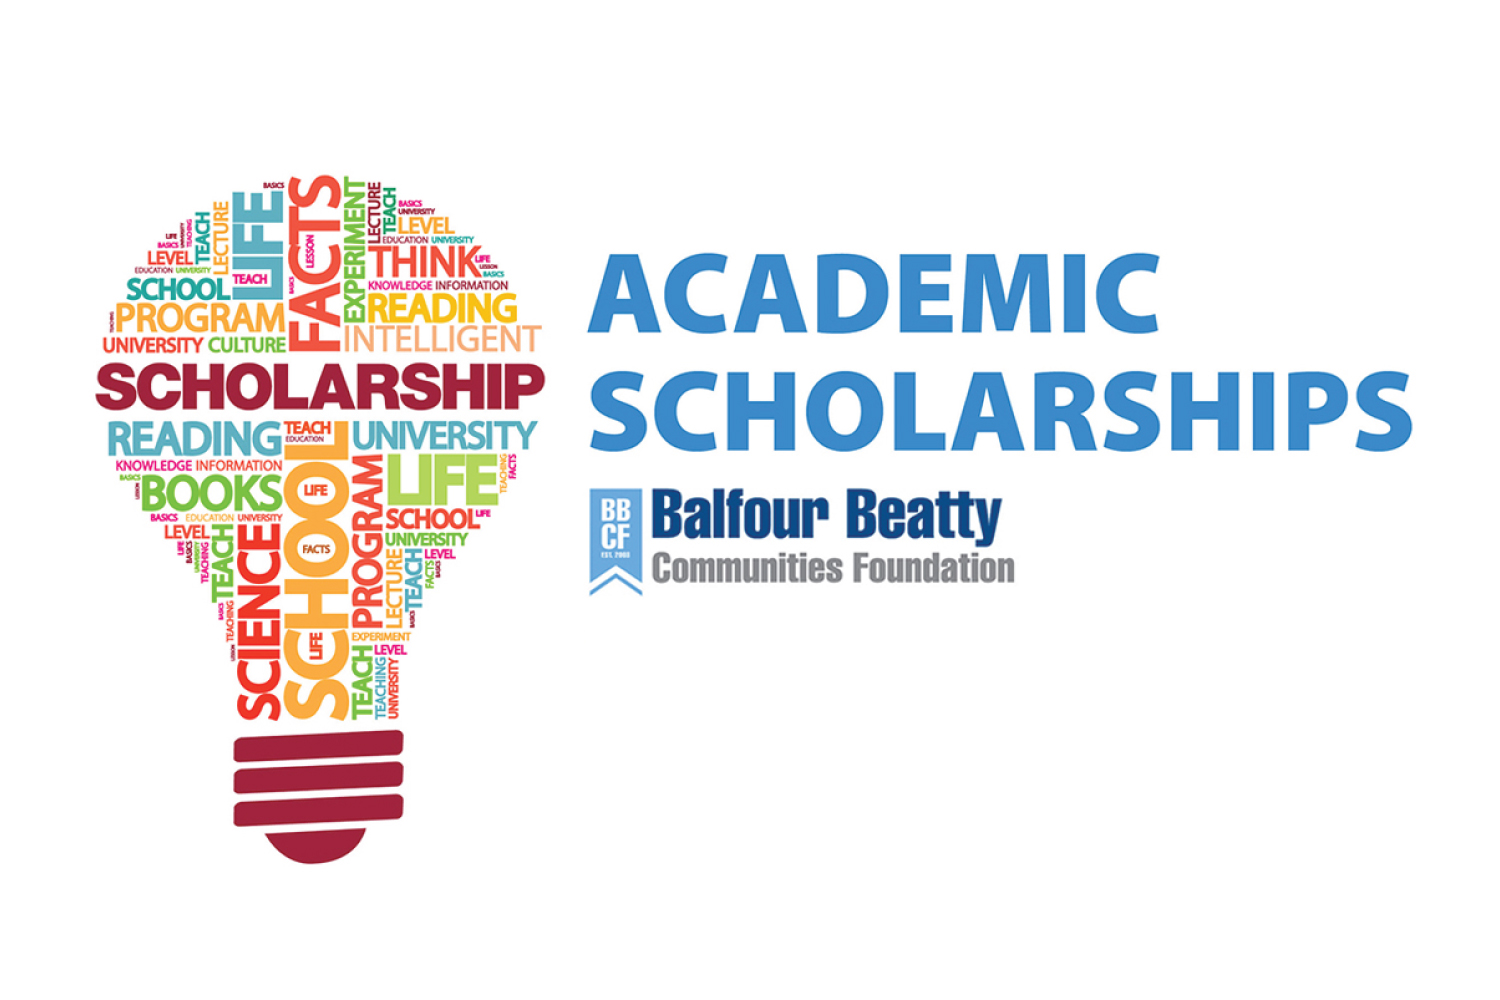 Balfour Beatty Communities Foundation awards more than $120,000 in Scholarships to residents